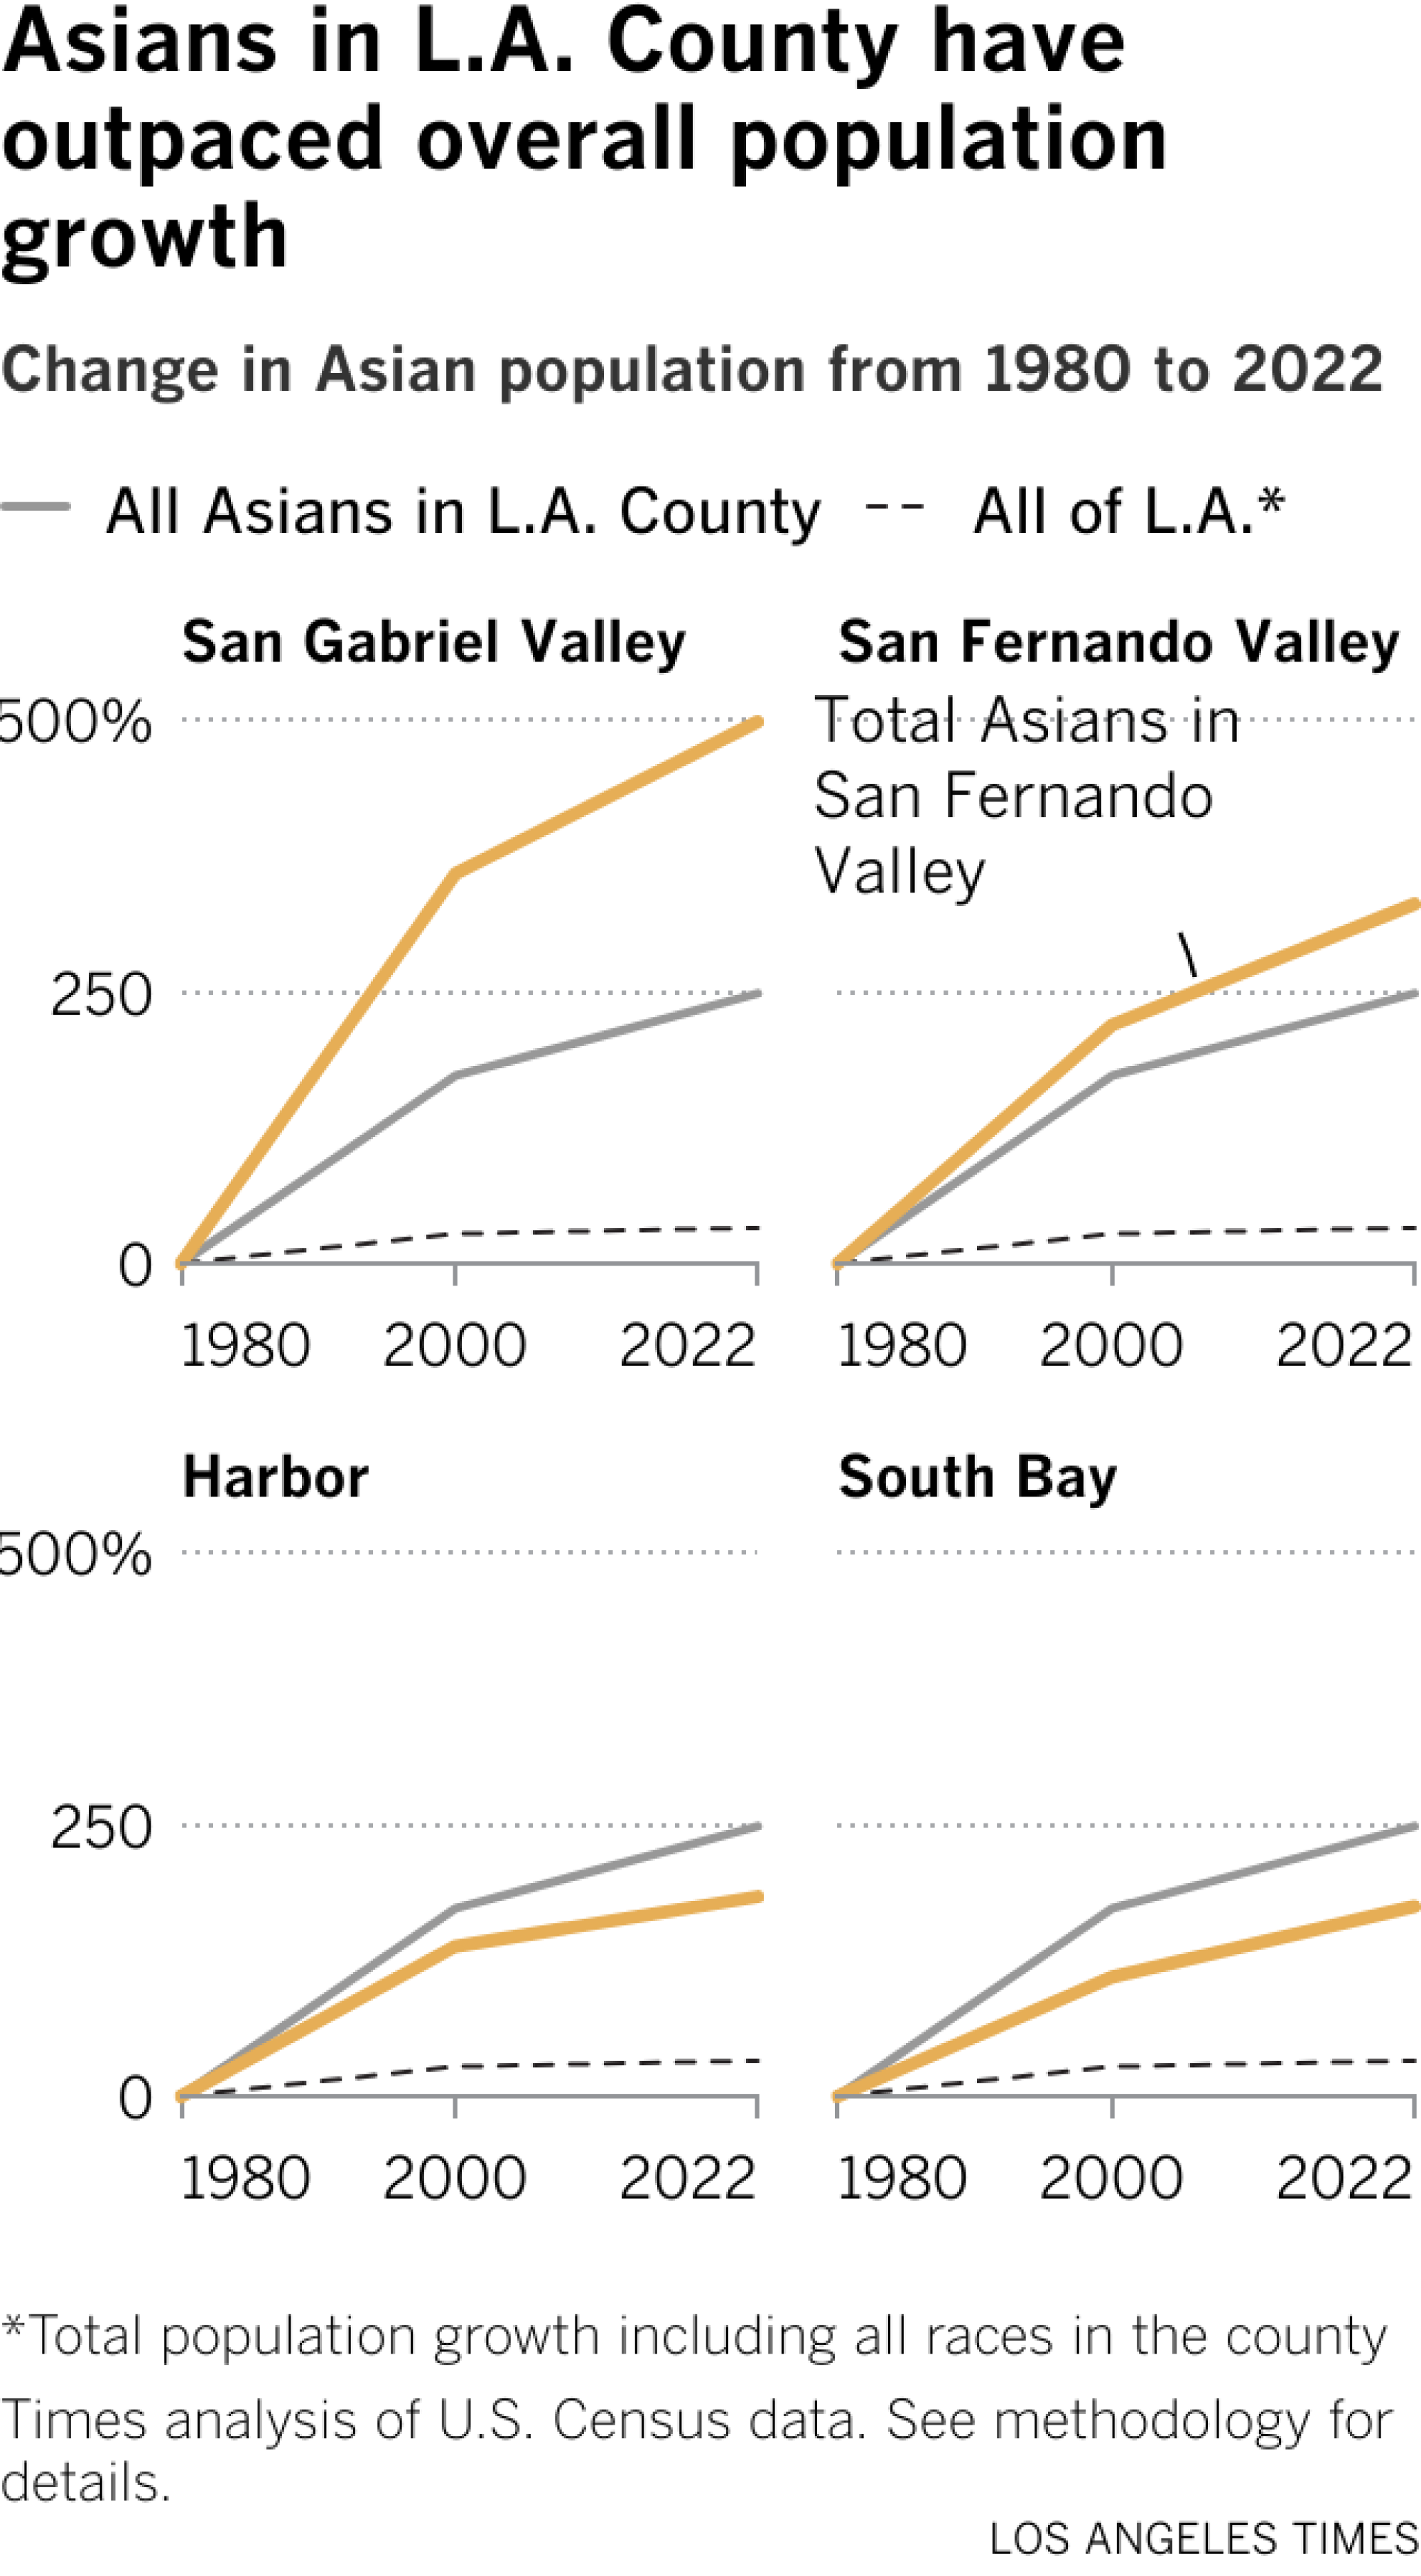 San Gabriel Valley has the highest growth in Asian population in LA County. 